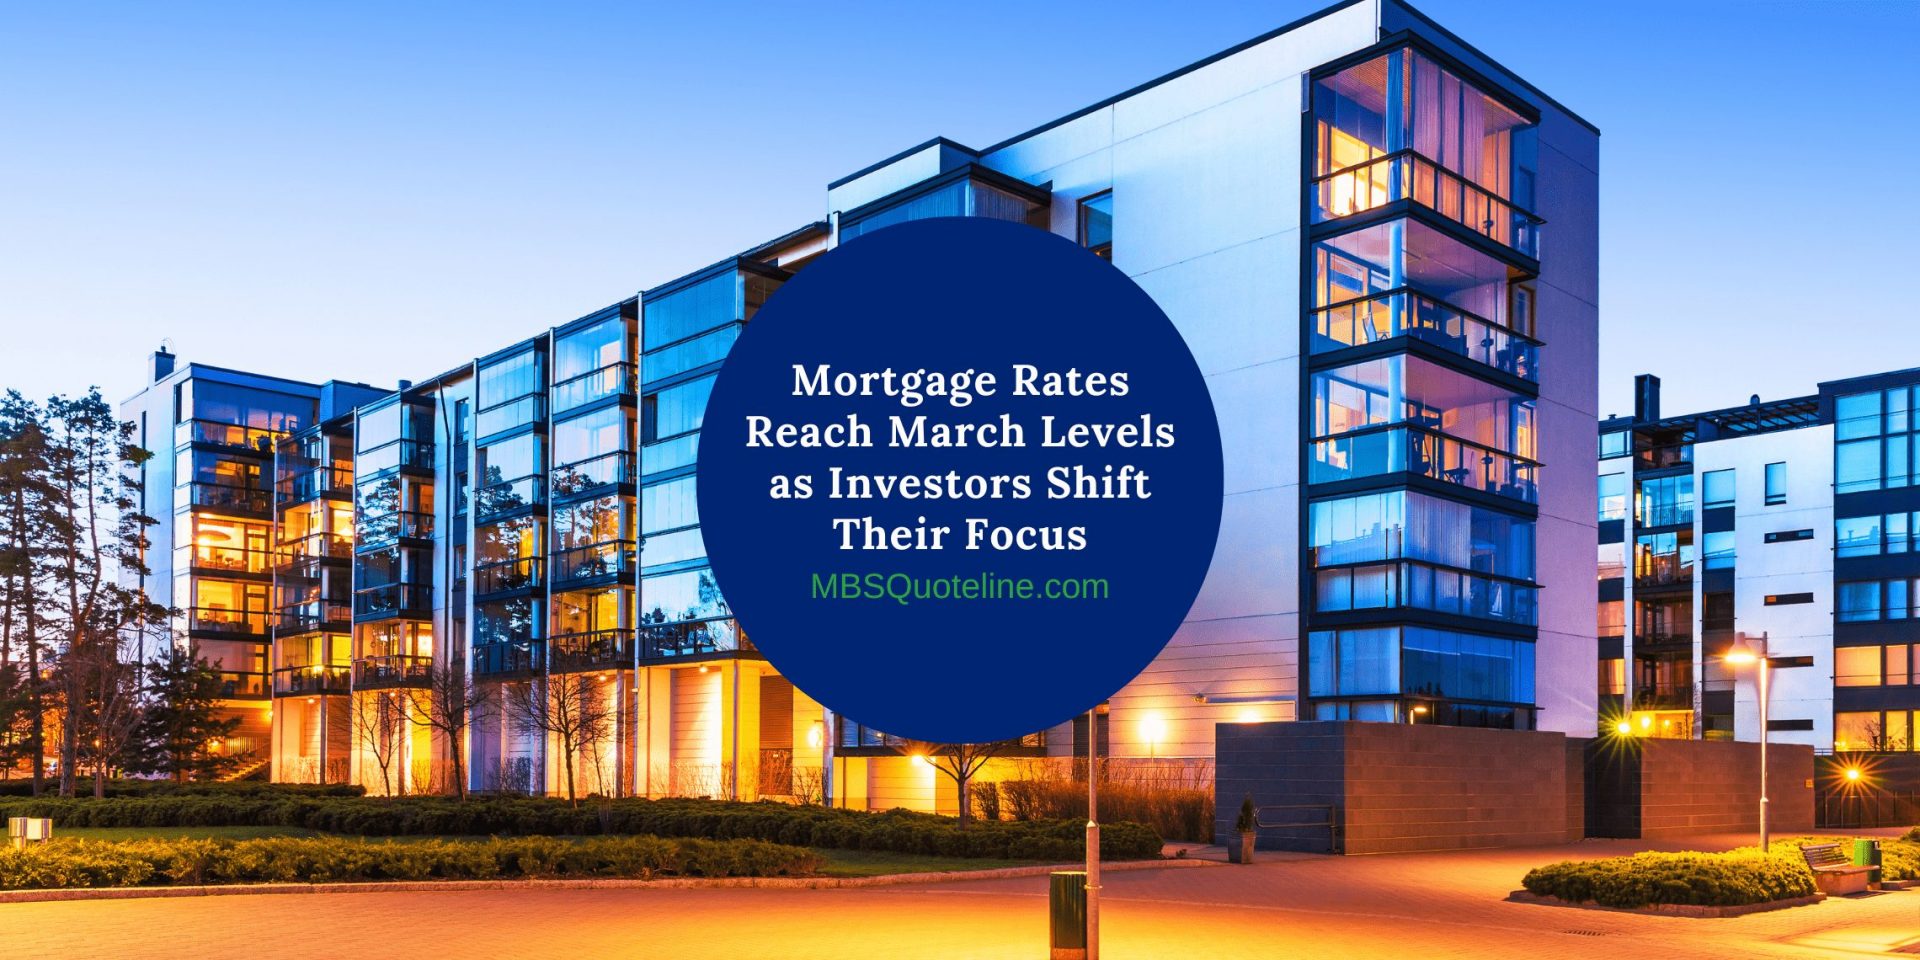 Mortgage Rates Reach March Levels as Investors Shift Focus MortgageTime MBSQuoteline Featured